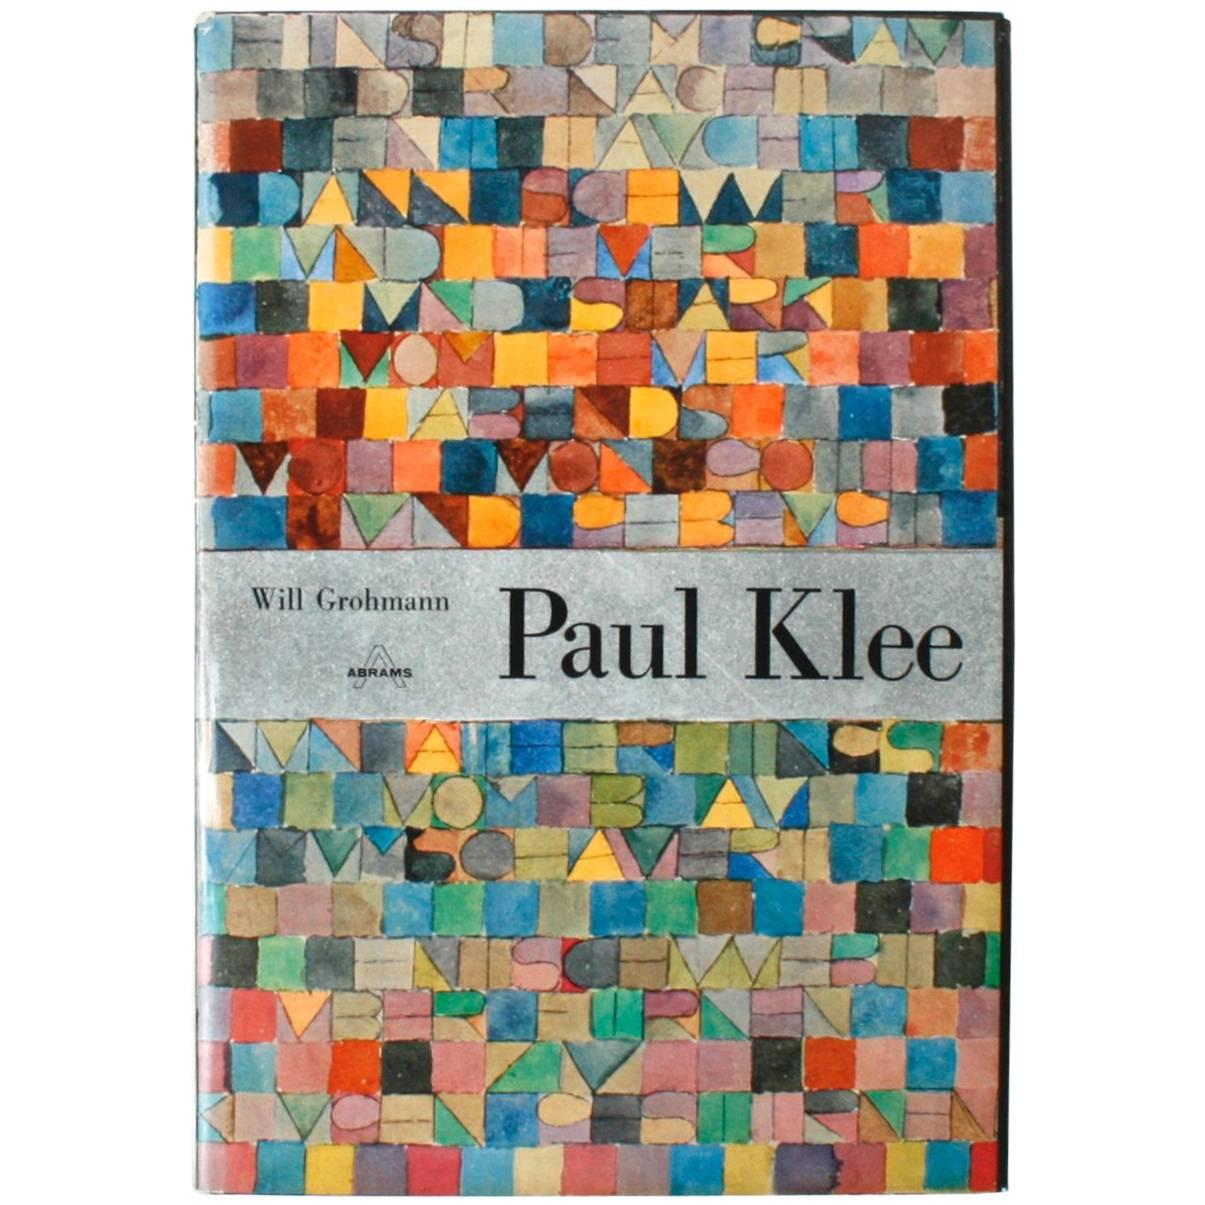 "Paul Klee" by Will Grohmann, First Edition Book